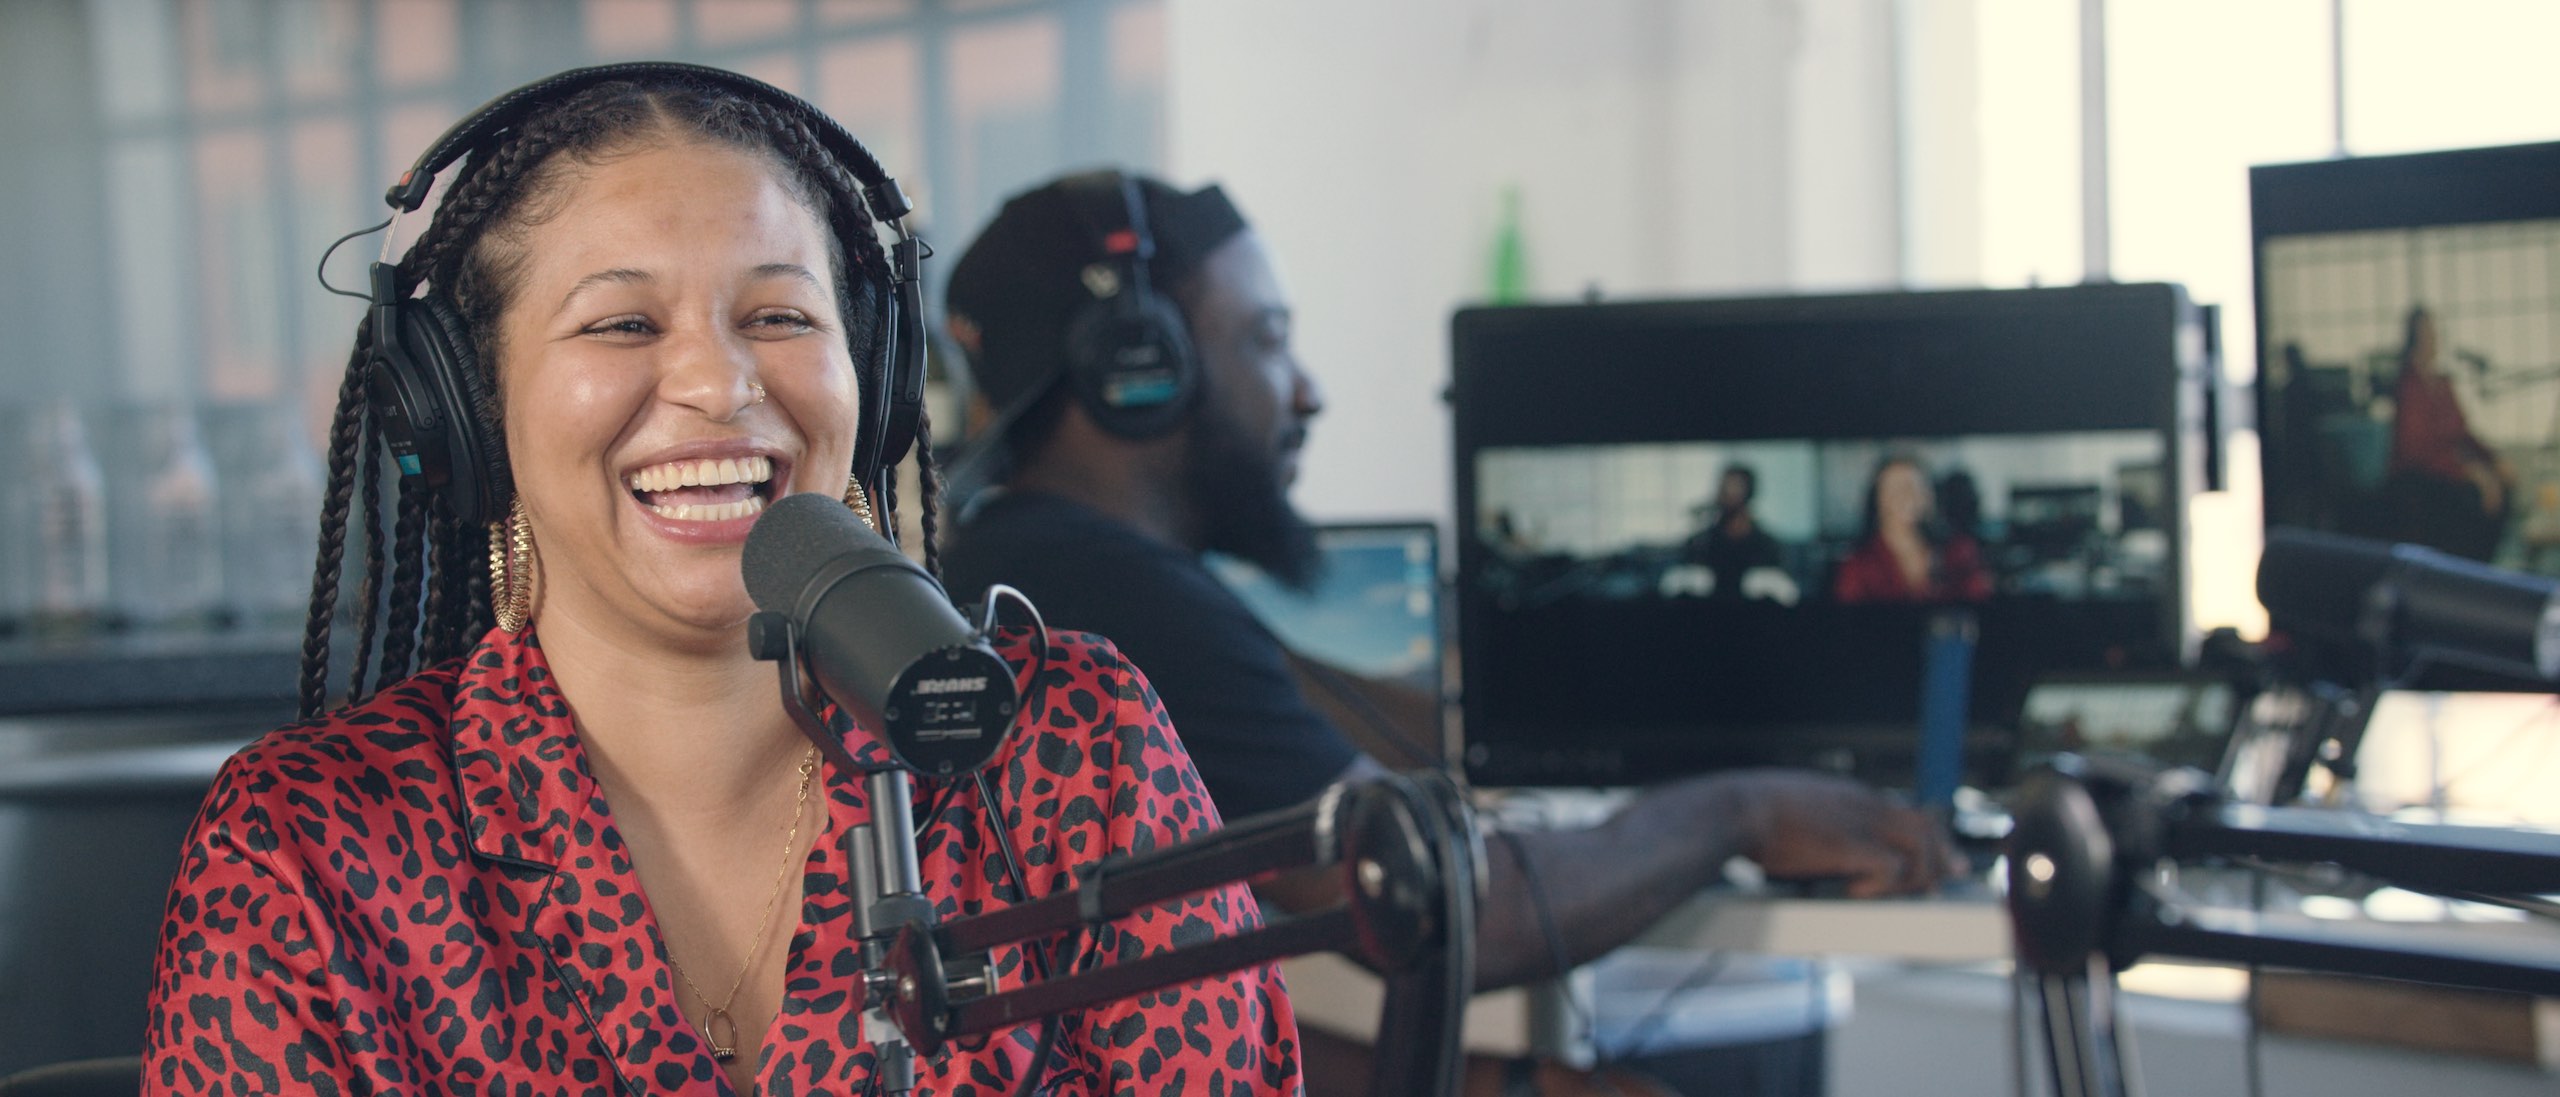 Uncreative Radio with Gabi Duran with braided black hair wearing black headphones laughing by microphone with side profile of African American man in the background by computer also wearing black headphones